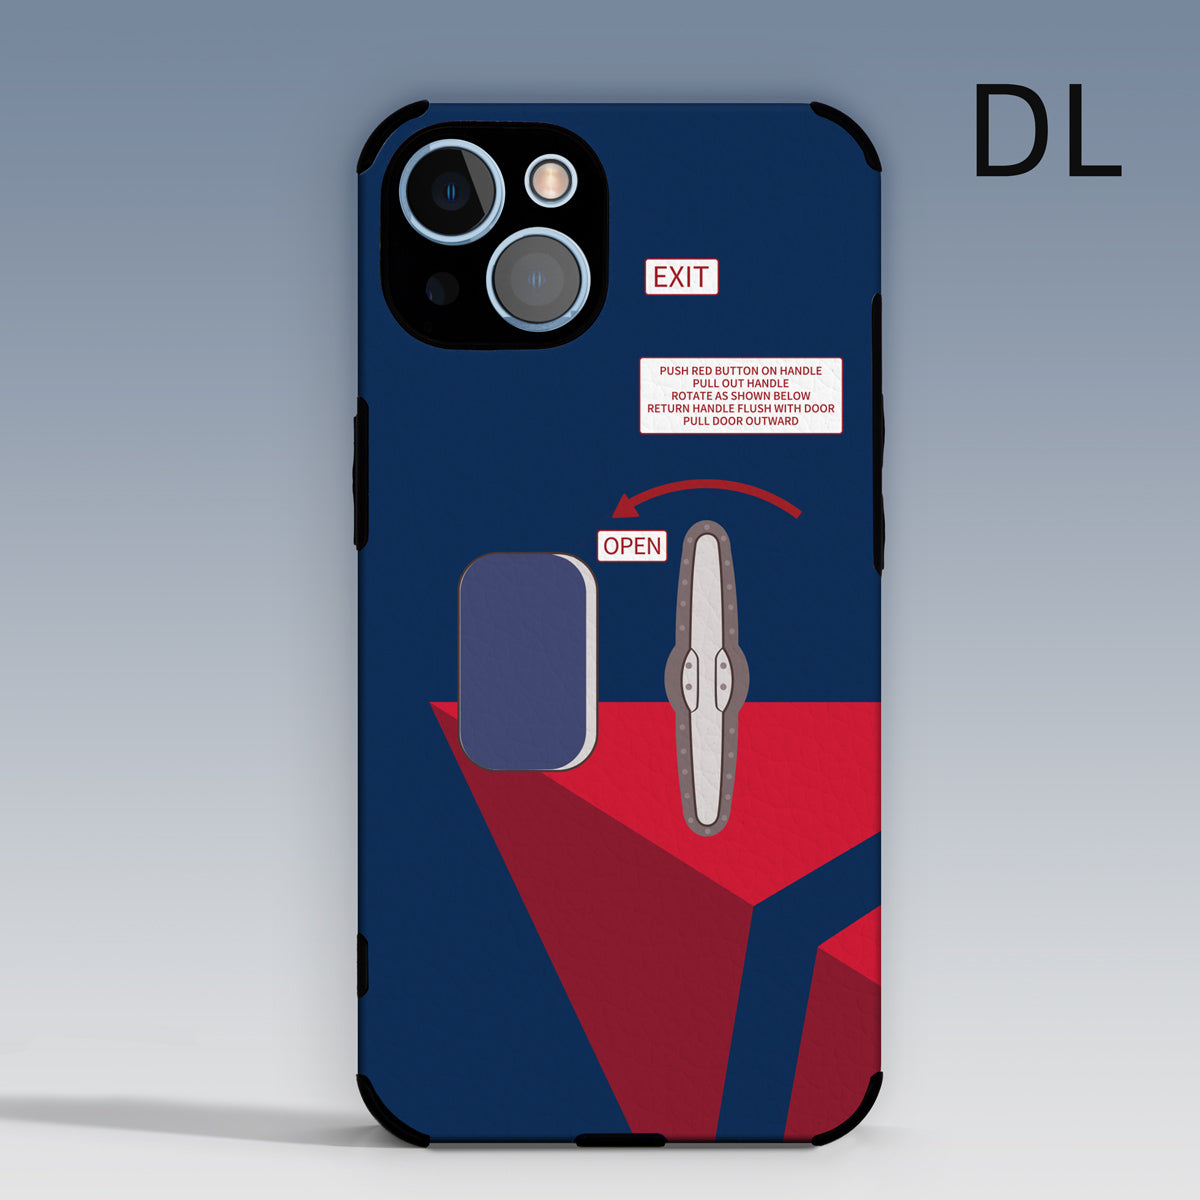 Delta Airlines DL Boeing 747 Phone Case aviation gift pilot iPhone Apple Samsung Android